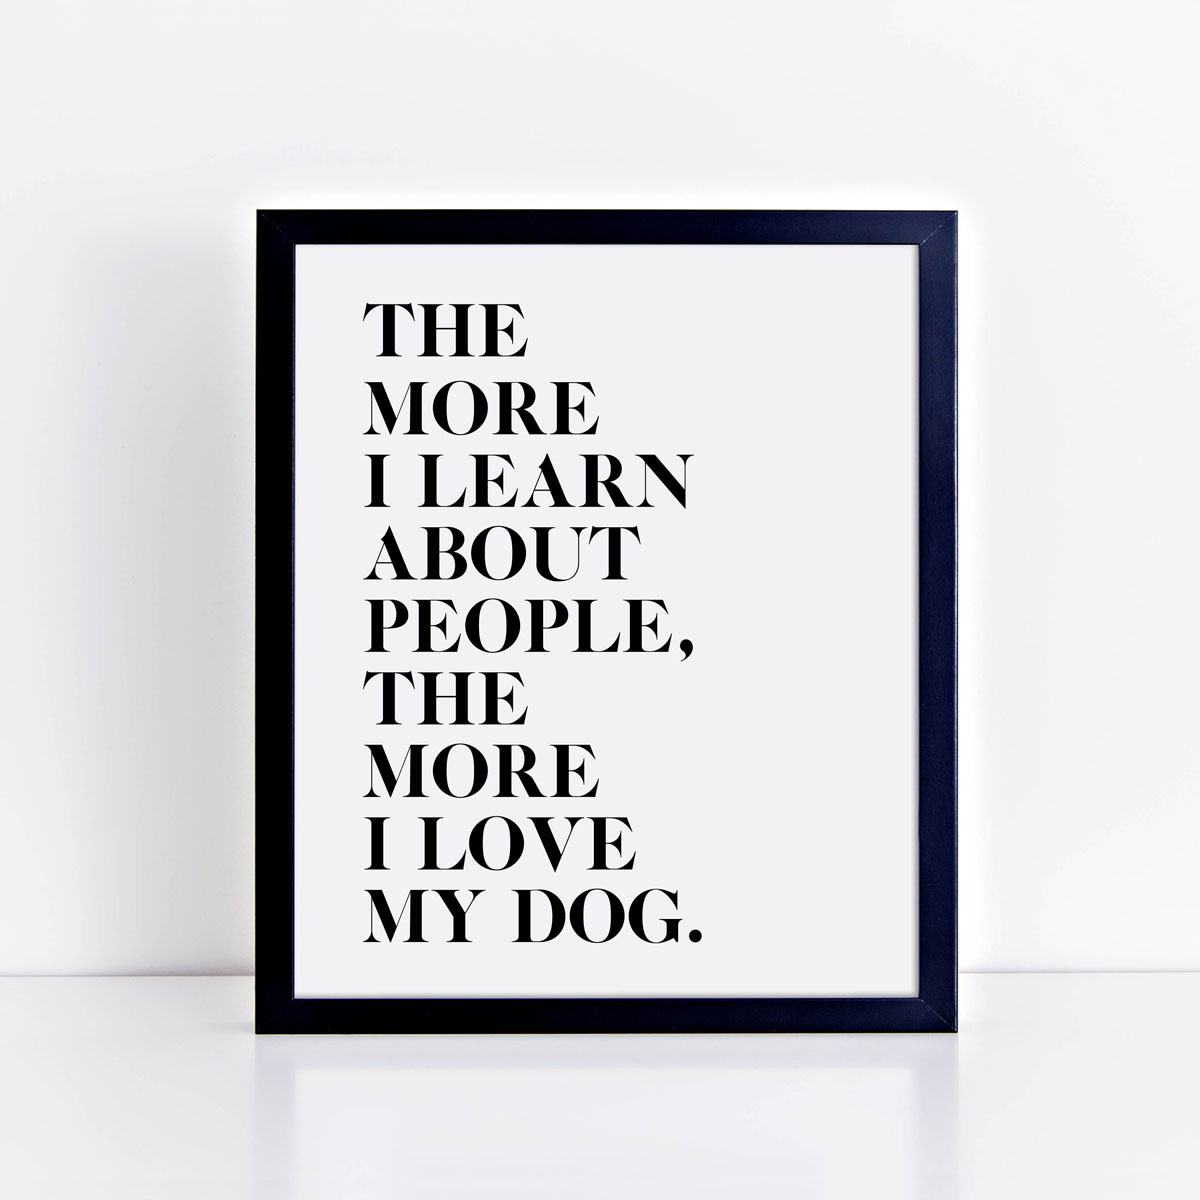 Tydography sells gorgeous printable typographic dog posters for the stylish pup lover! Best of all, they're absolutely affordable! Check out our interview with Tydography's founder and designer, Lisa, and score 20% off your purchase this month only with code THEBROKEDOG.